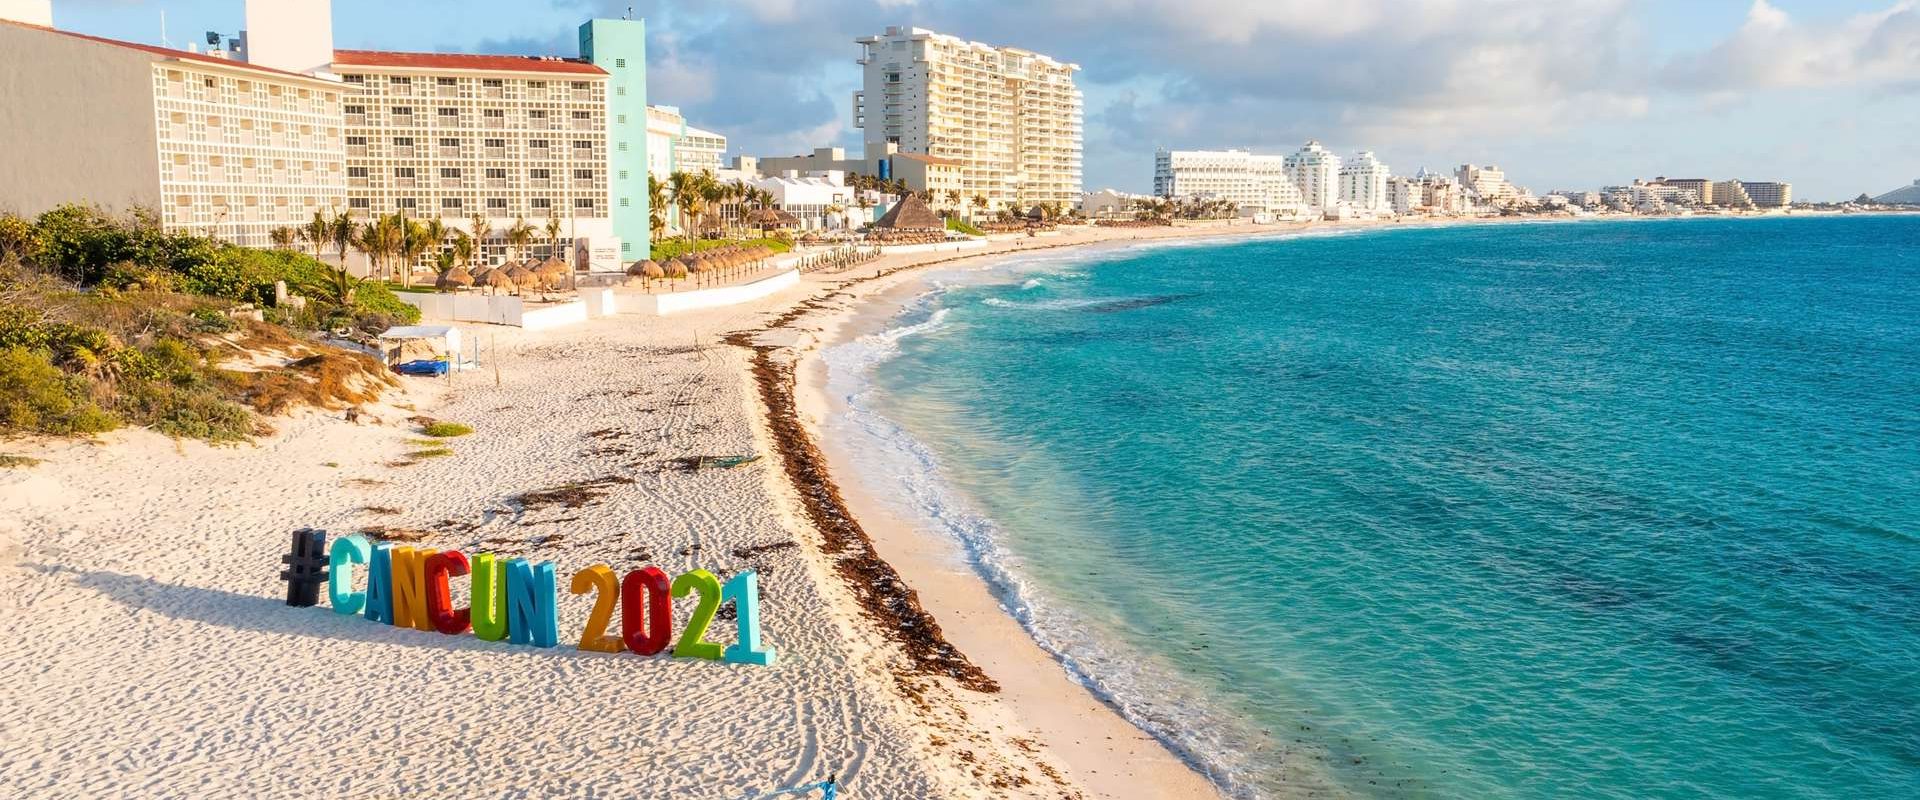 Cancun, Mexico. May 19, 2021. View of the Cancun 2021 sign on the beach in Cancun in Mexico. Cancun sign hashtag.